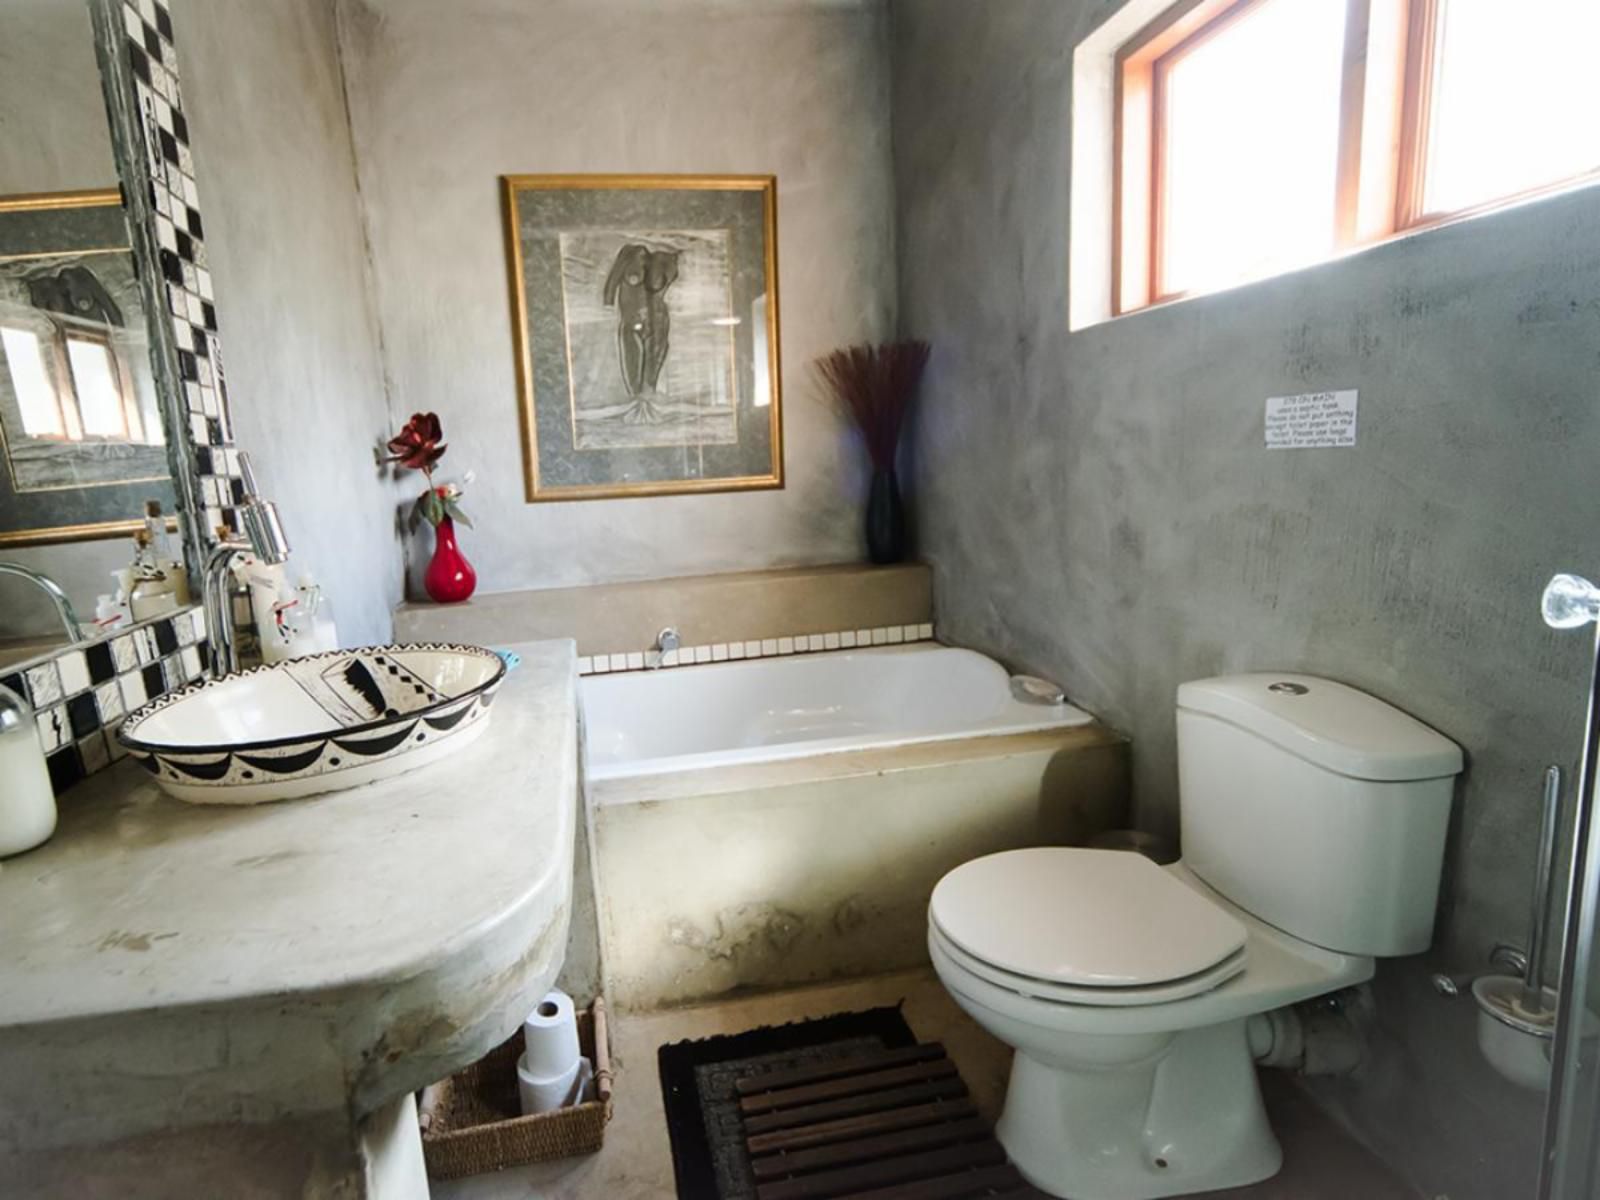 278 On Main Clarens Free State South Africa Unsaturated, Bathroom